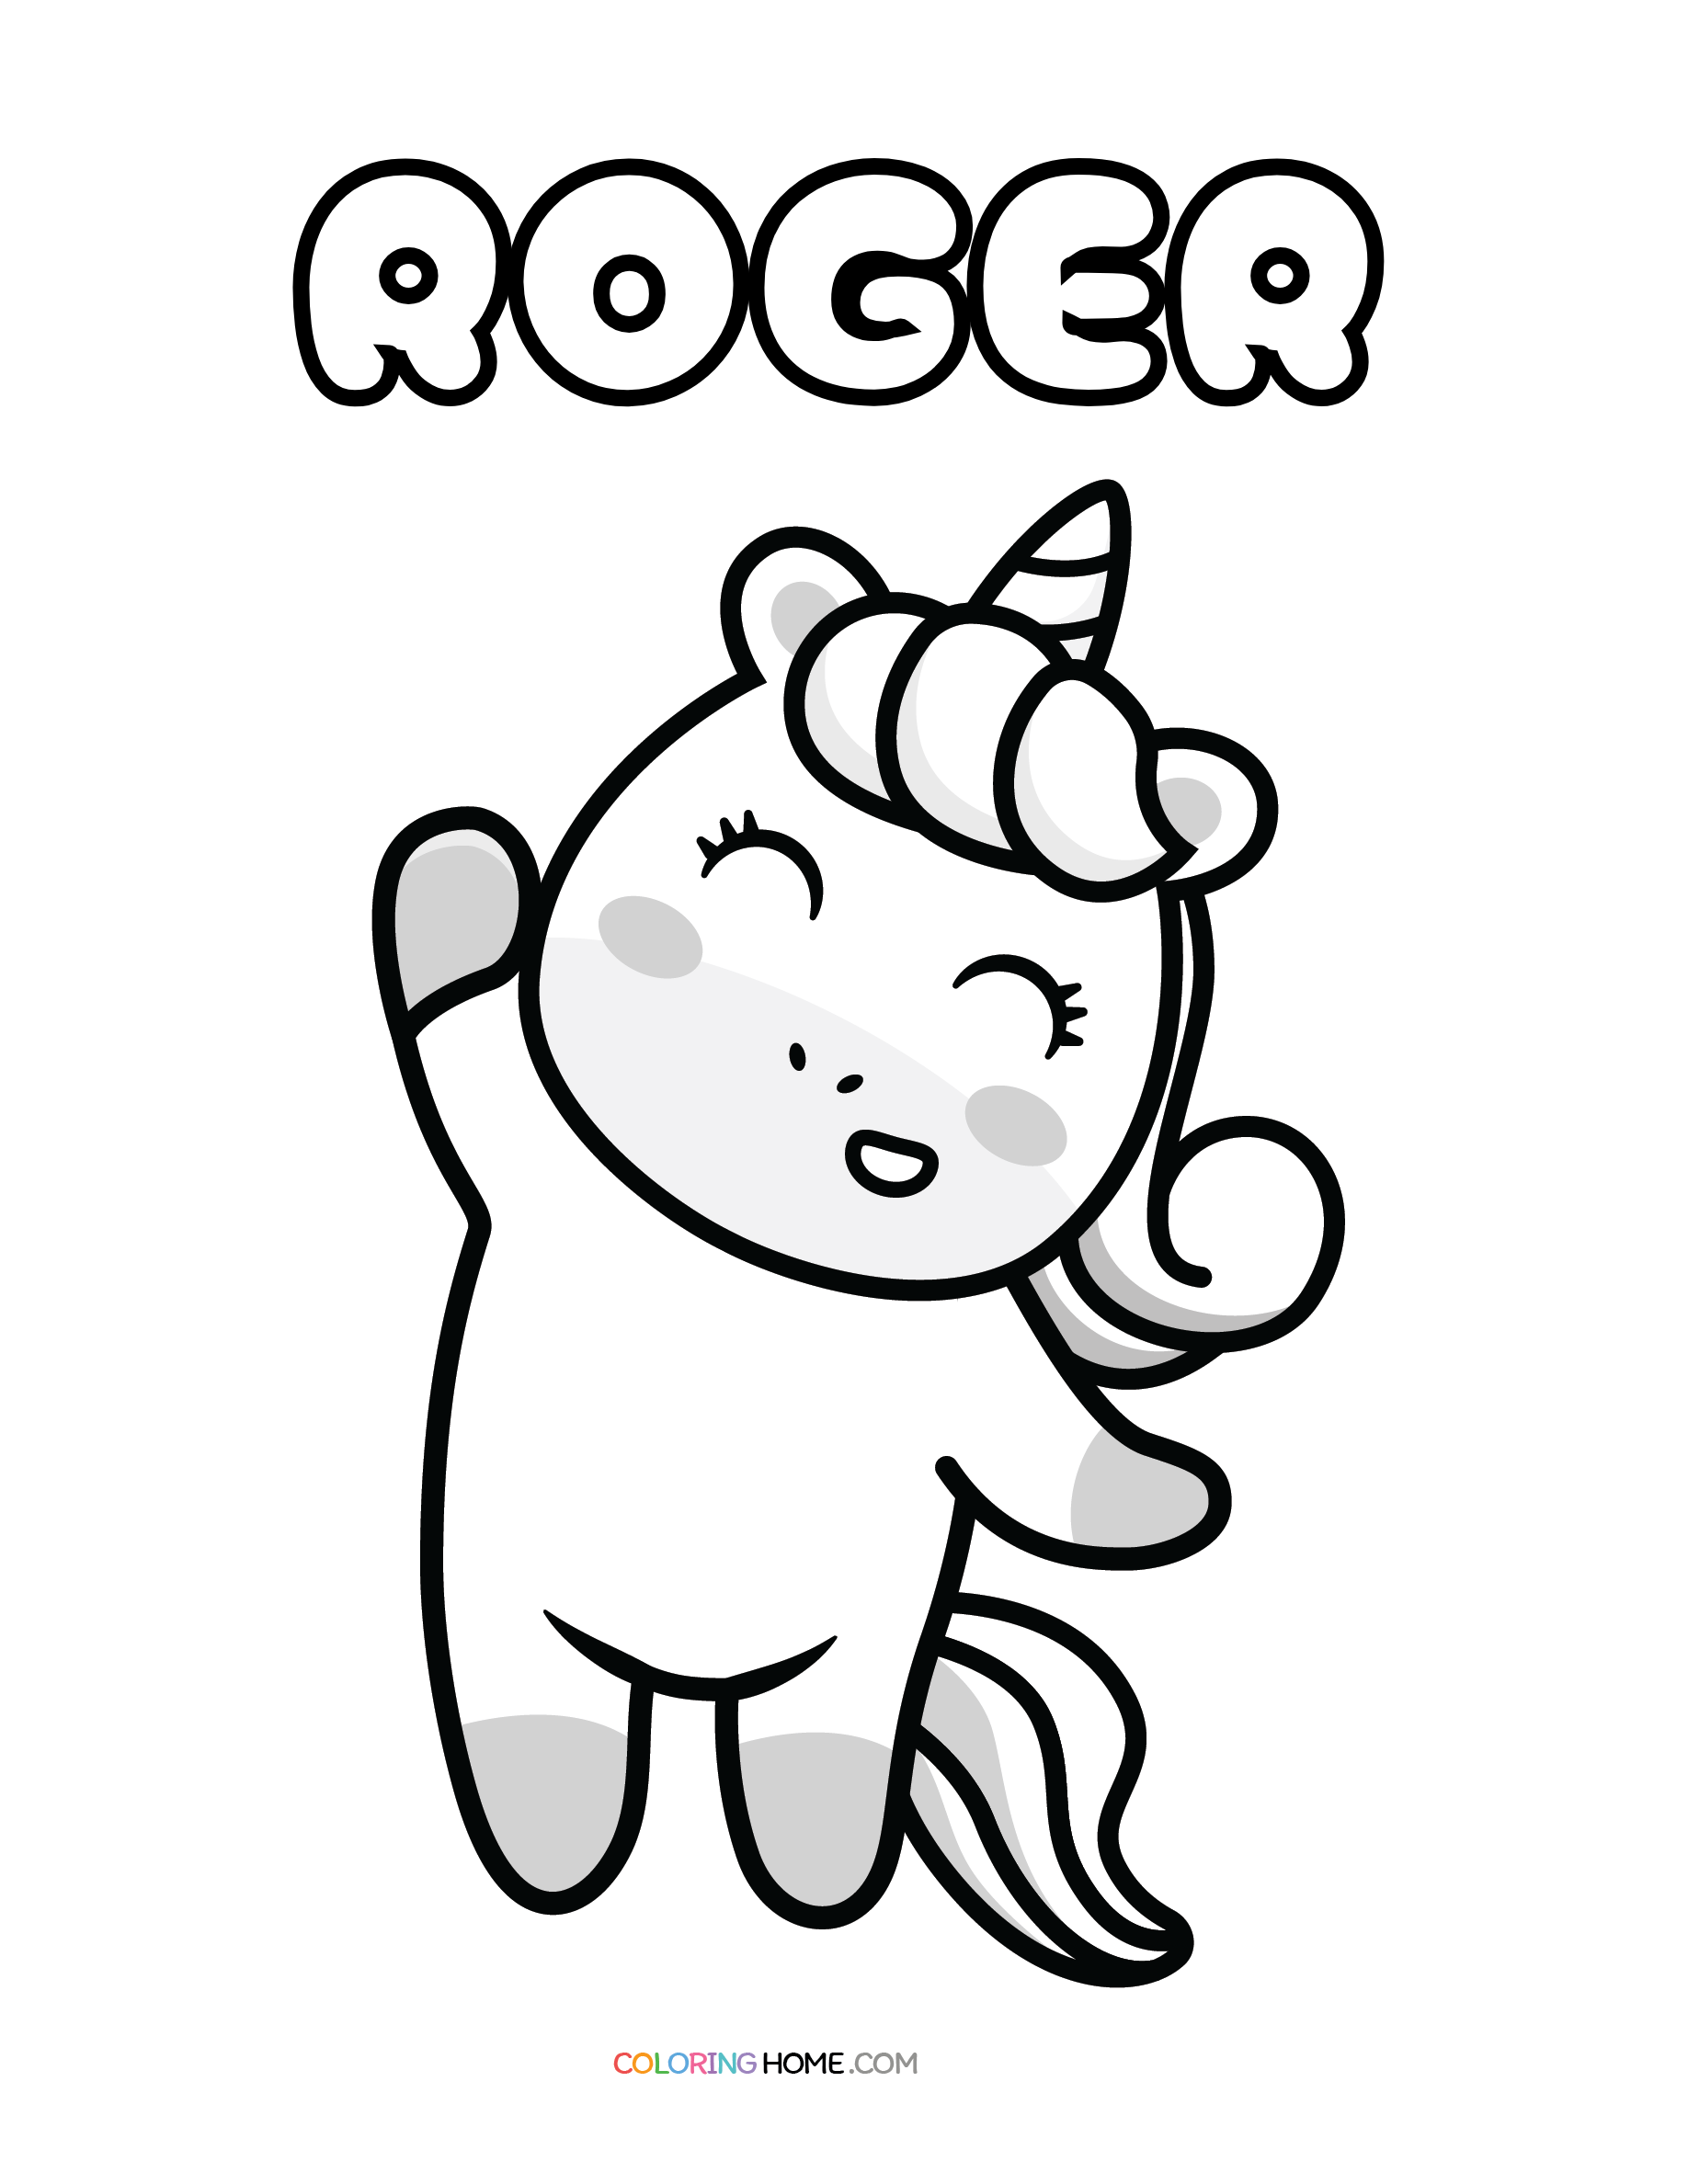 Roger unicorn coloring page